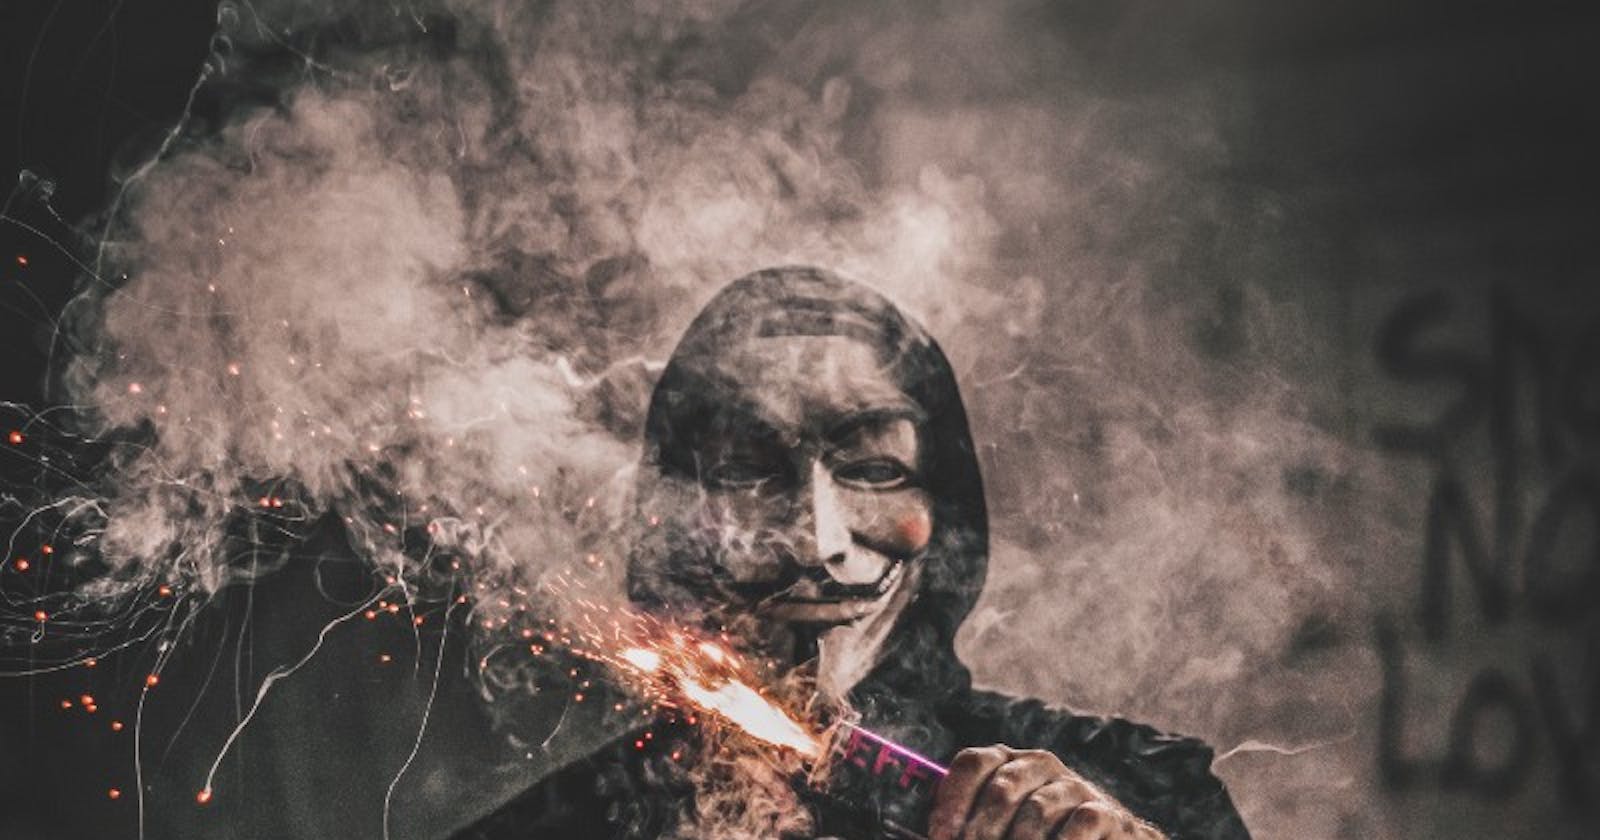 Anonymous: The Shadowy Hacking Group Declared Cyberwar On Russia